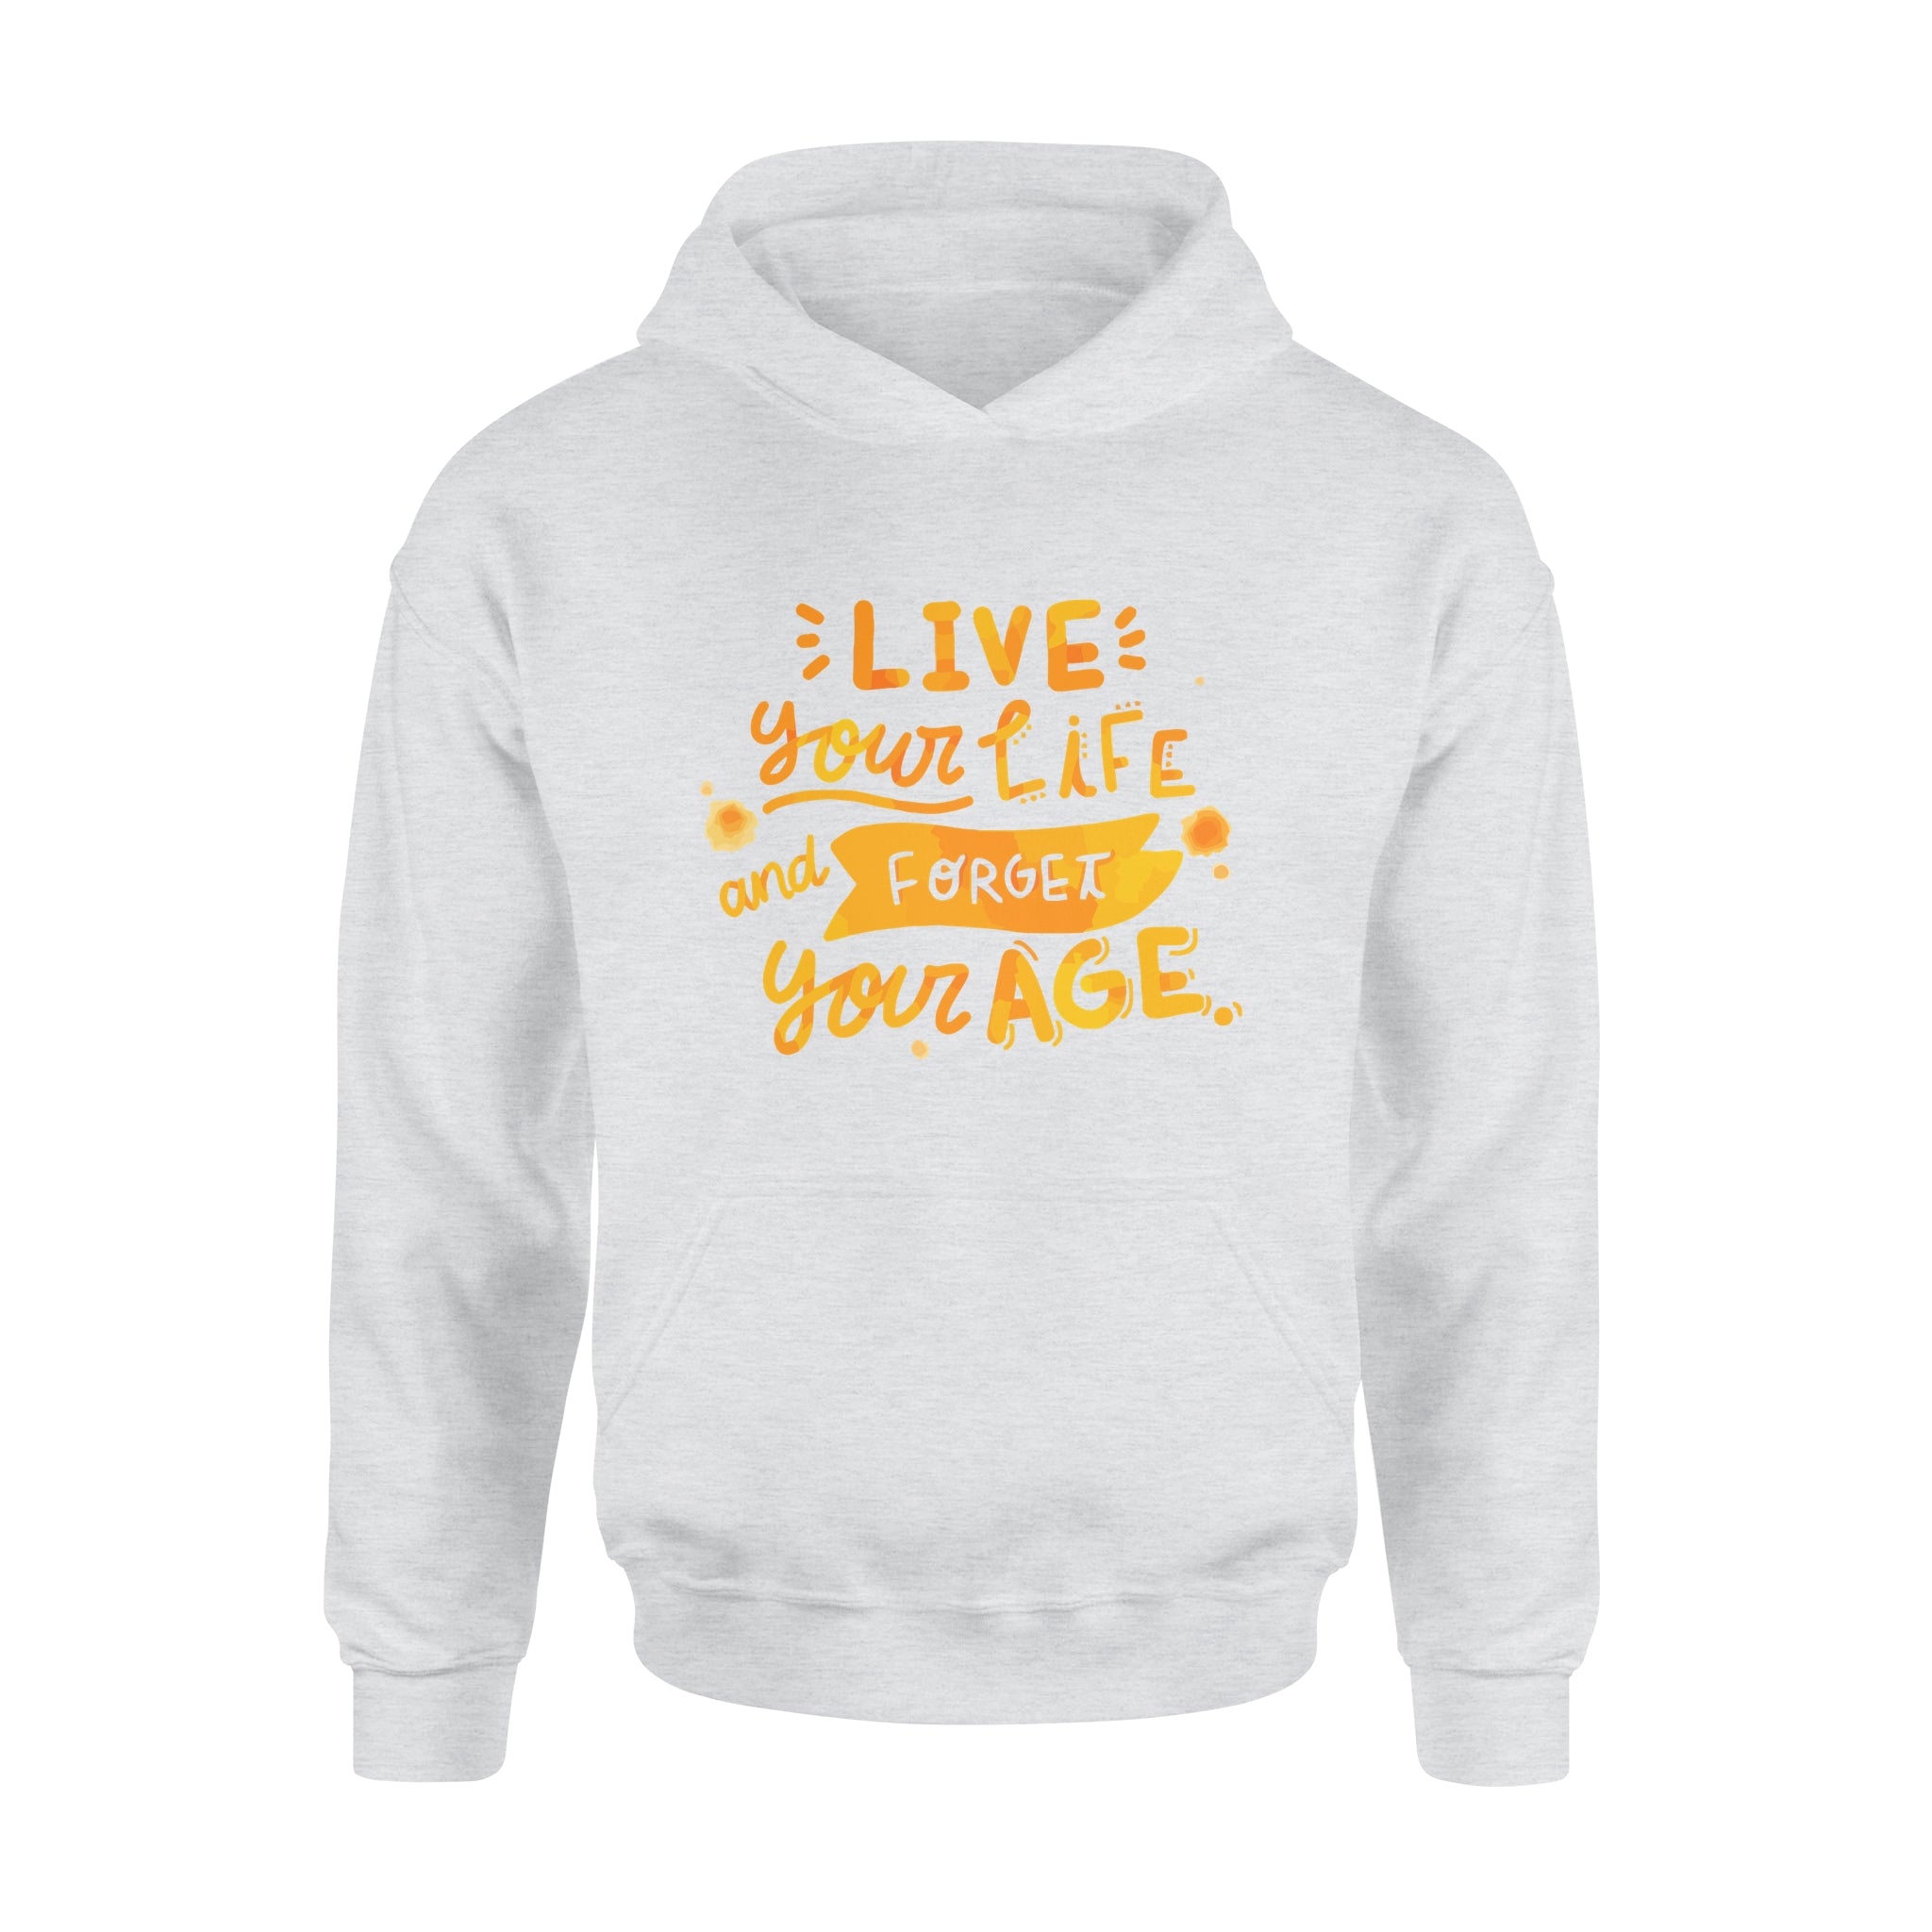 Live Your Life and Forget Your Age - Hoodie